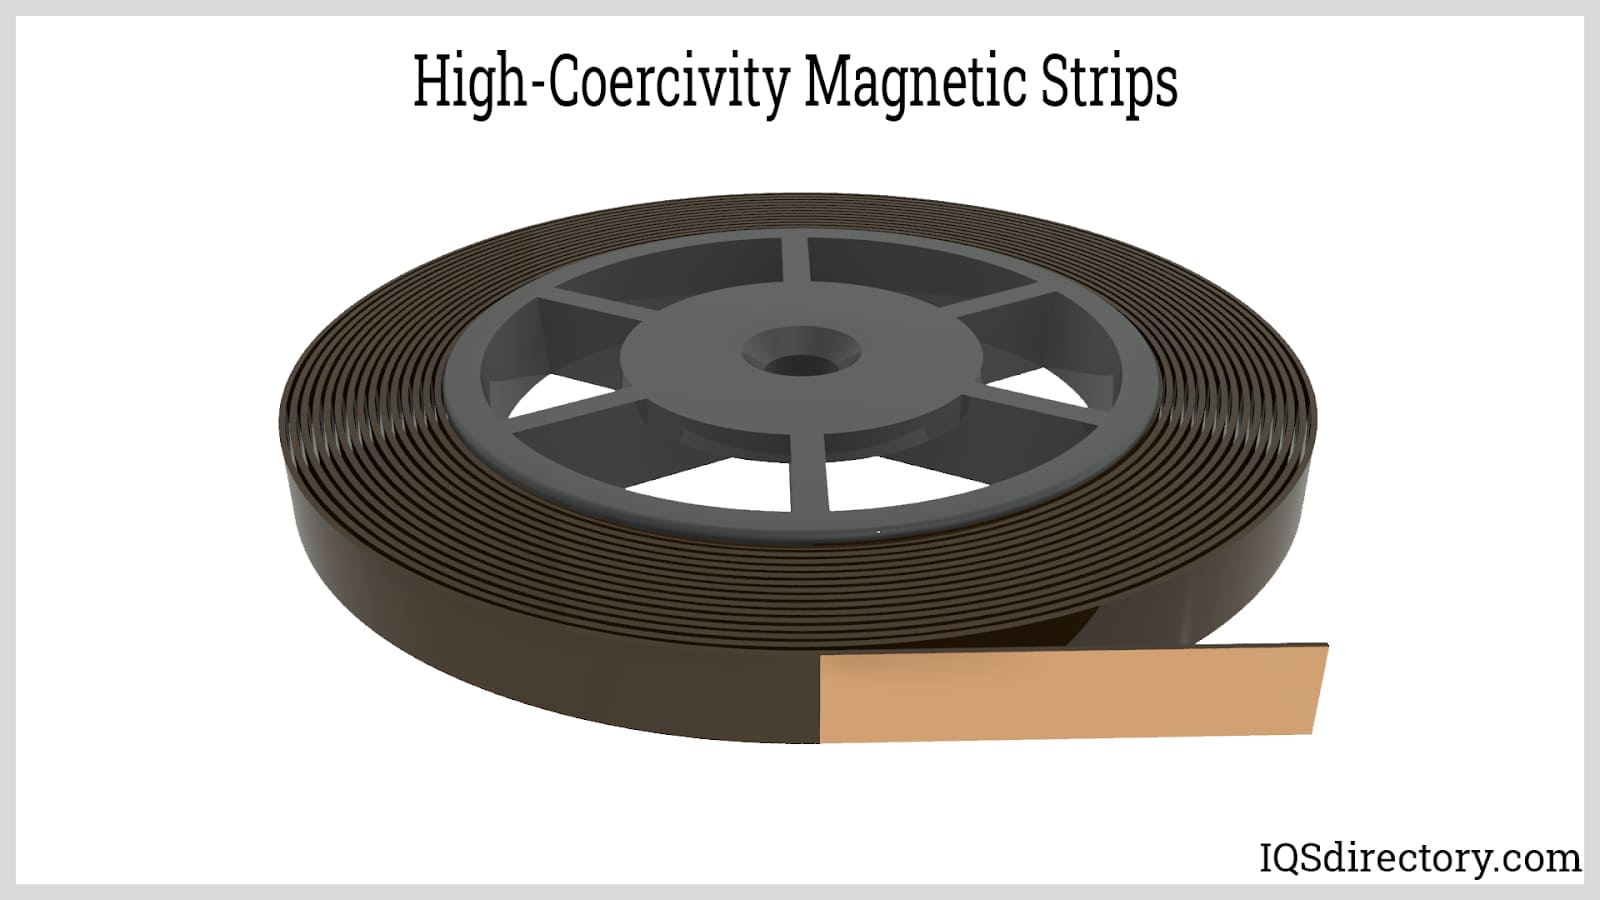 You can buy Flexible magnets form our store at affordable prices. We  provide high quality magnets that fulf…